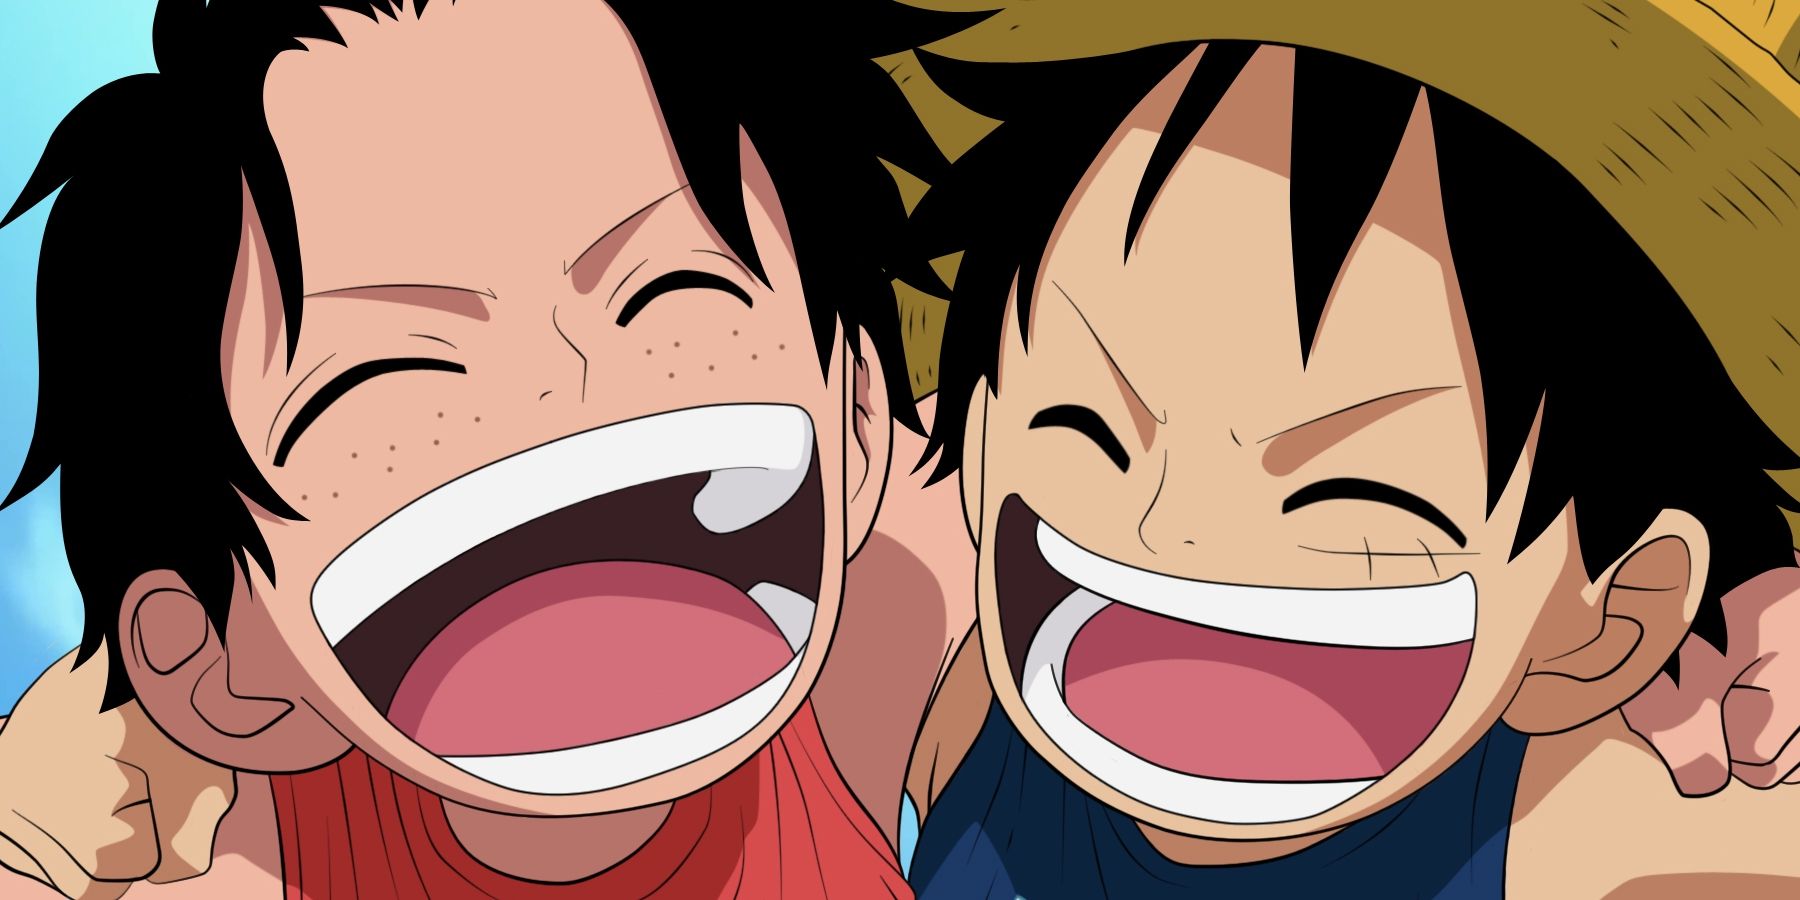 Ace and Luffy as kids